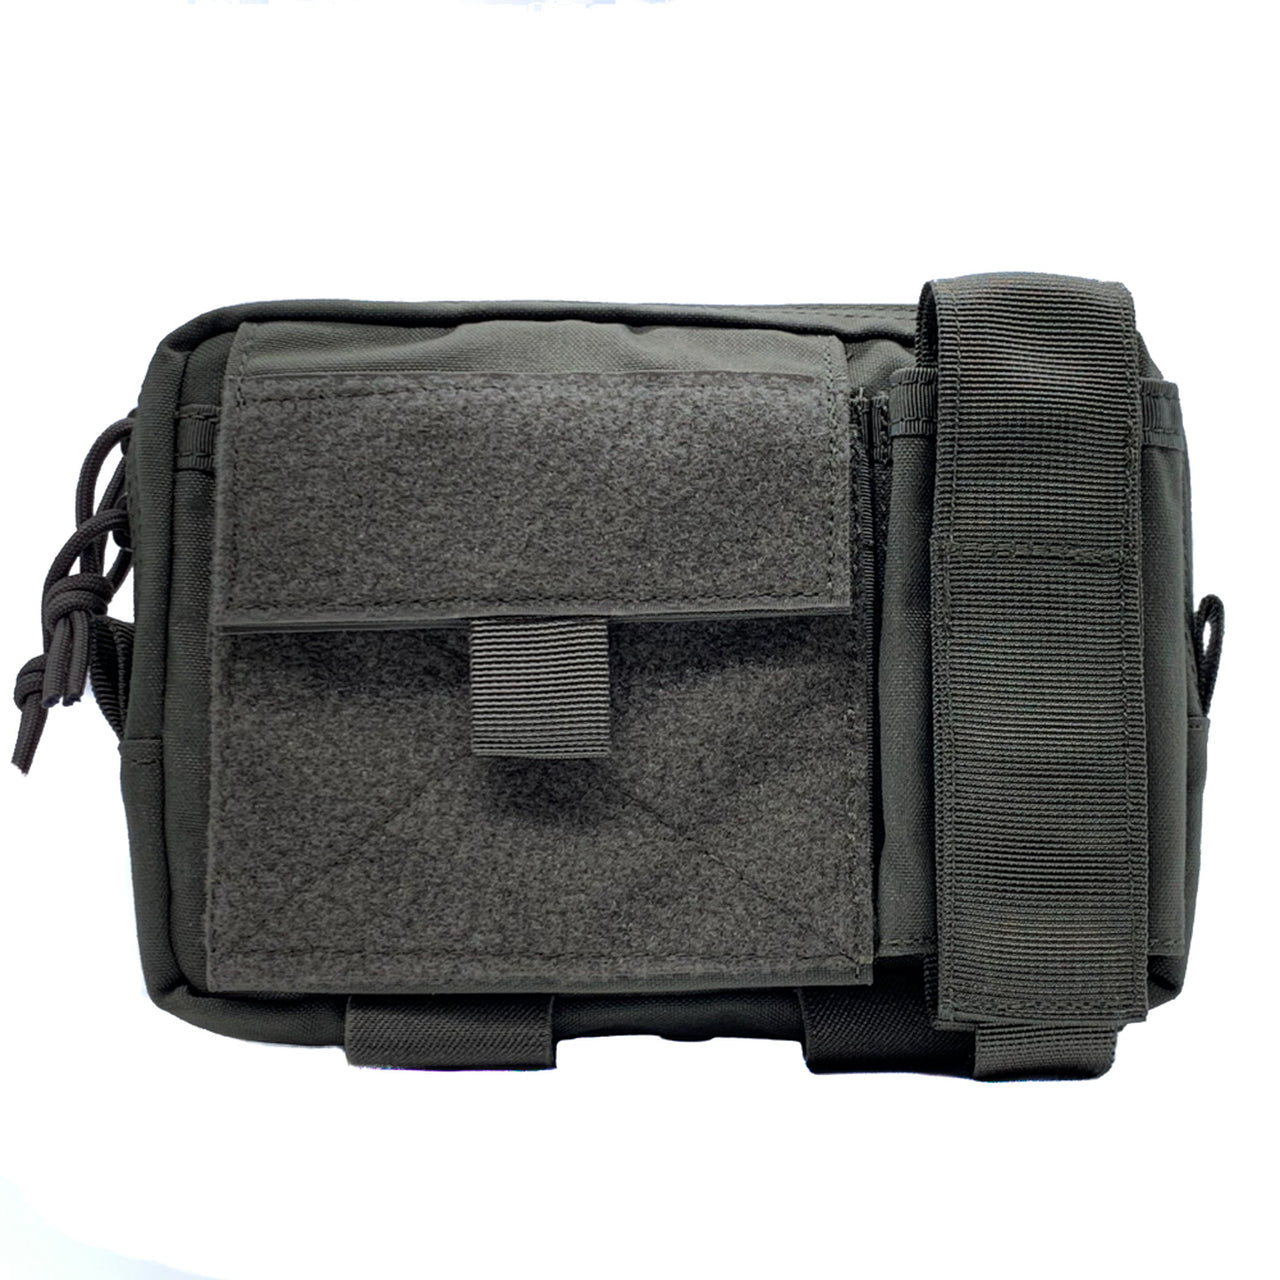 A Shellback Tactical Super Admin Pouch with a zippered compartment.